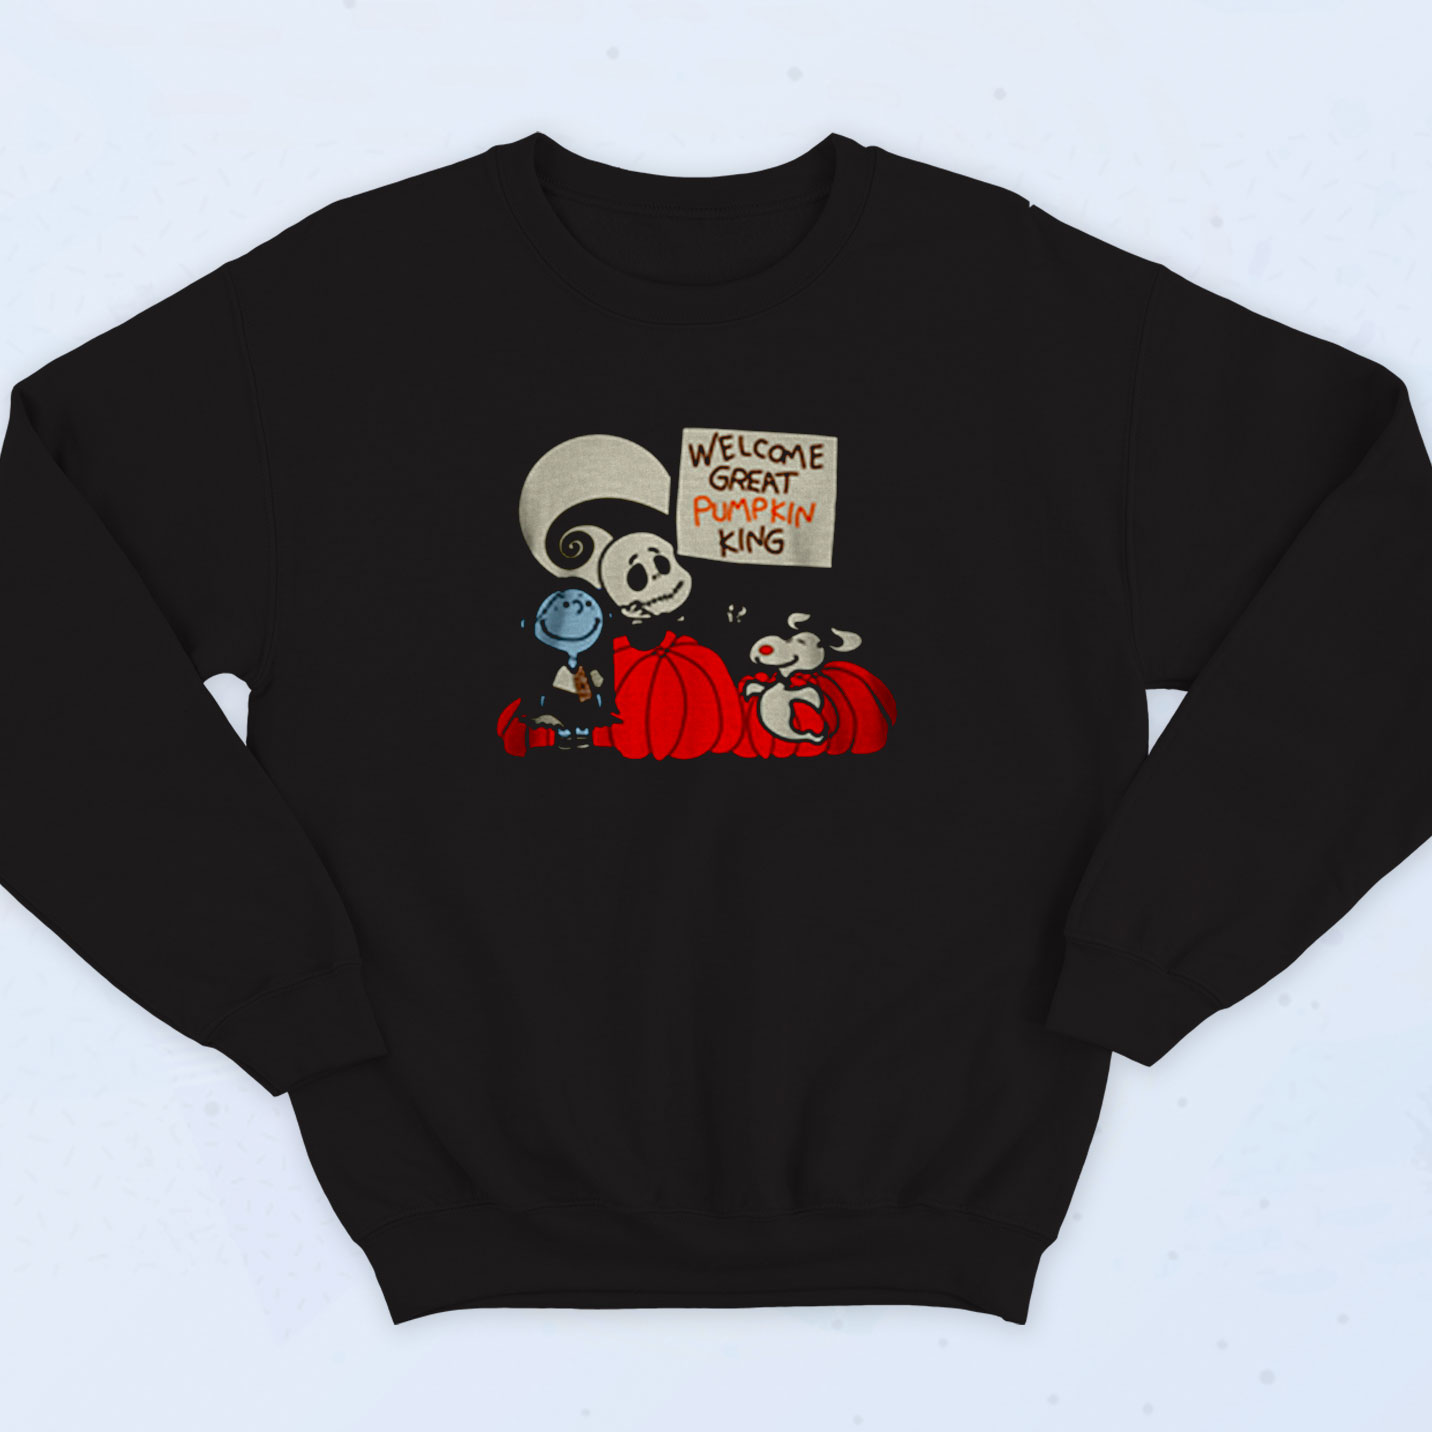 Welcome Great Pumpkin King Snoopy 90s Sweatshirt Fashion - 90sclothes.com